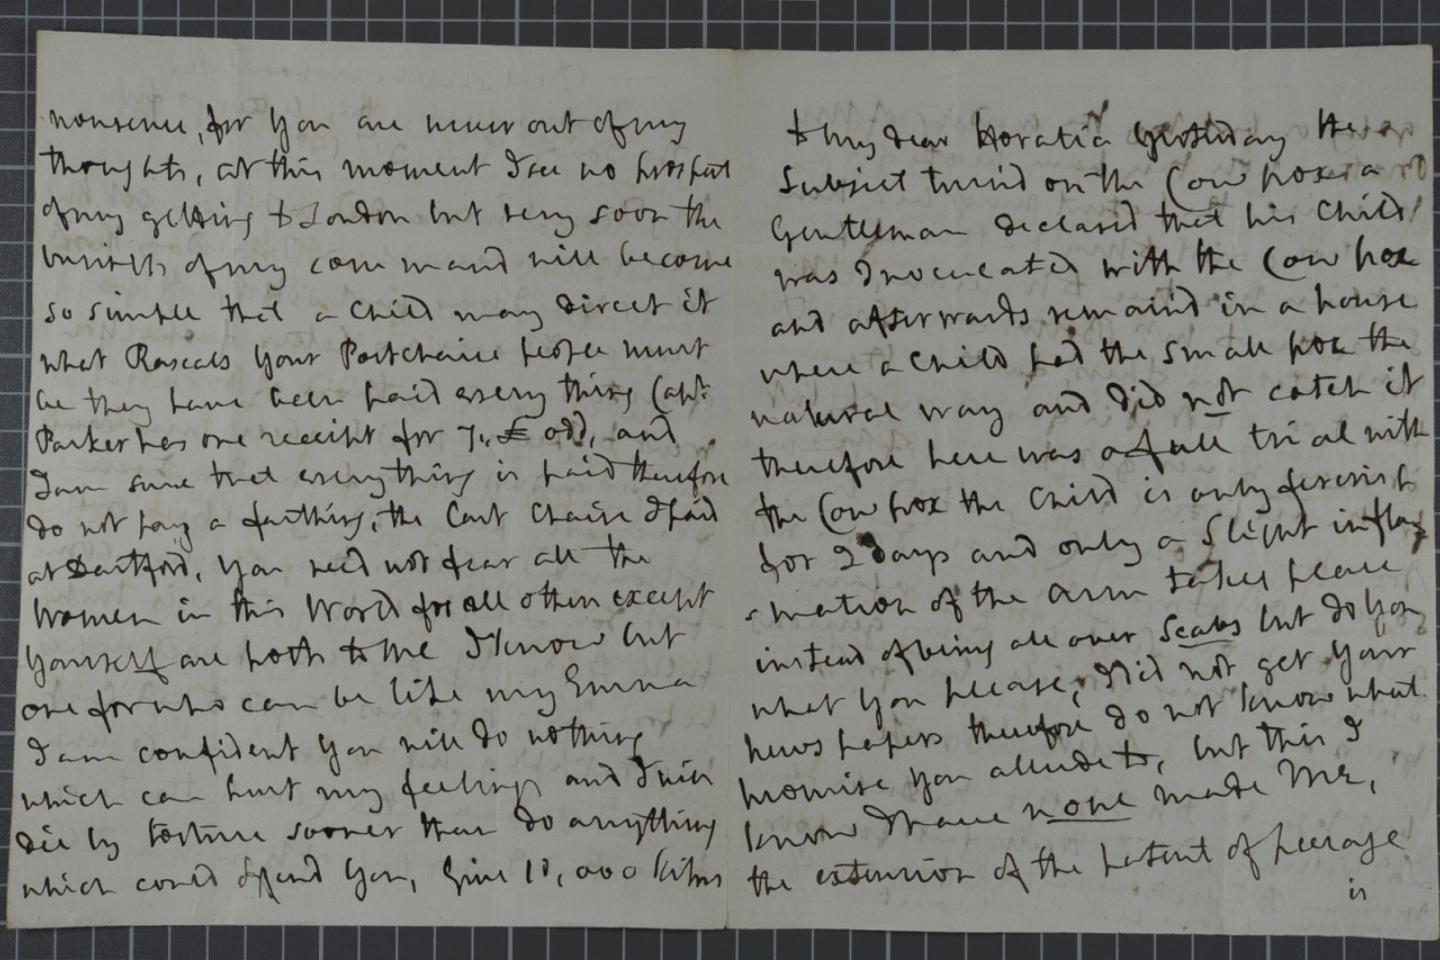 Nelson's handwritten letter to Emma Hamilton, dated 31 July 1801. The section about inoculation begins in the top right of the image